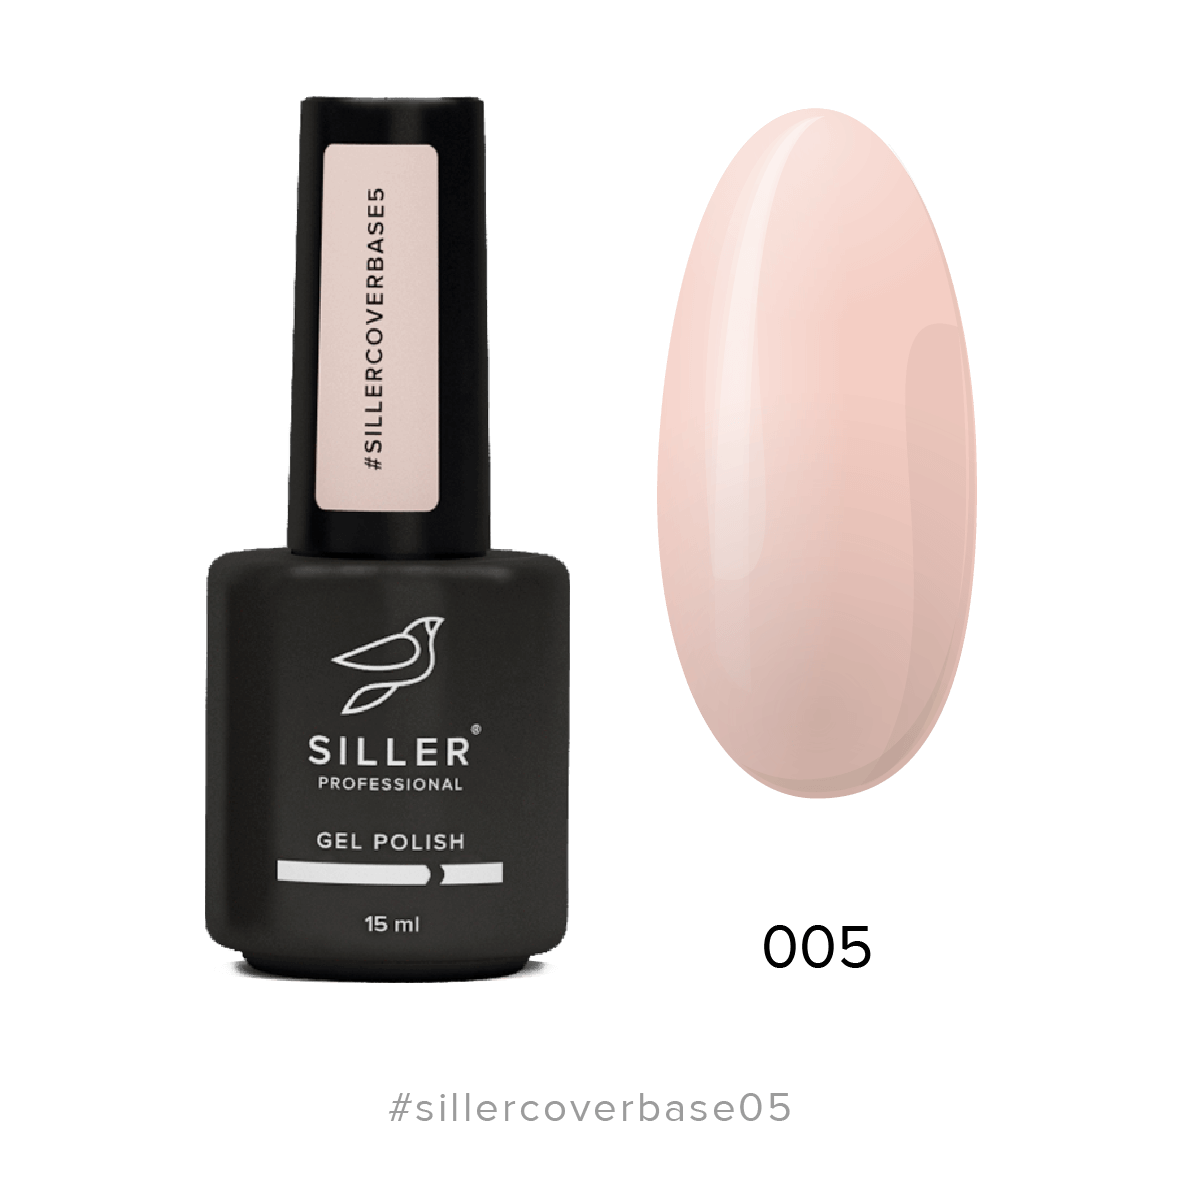 Siller Cover Base #5 - Pale Pink